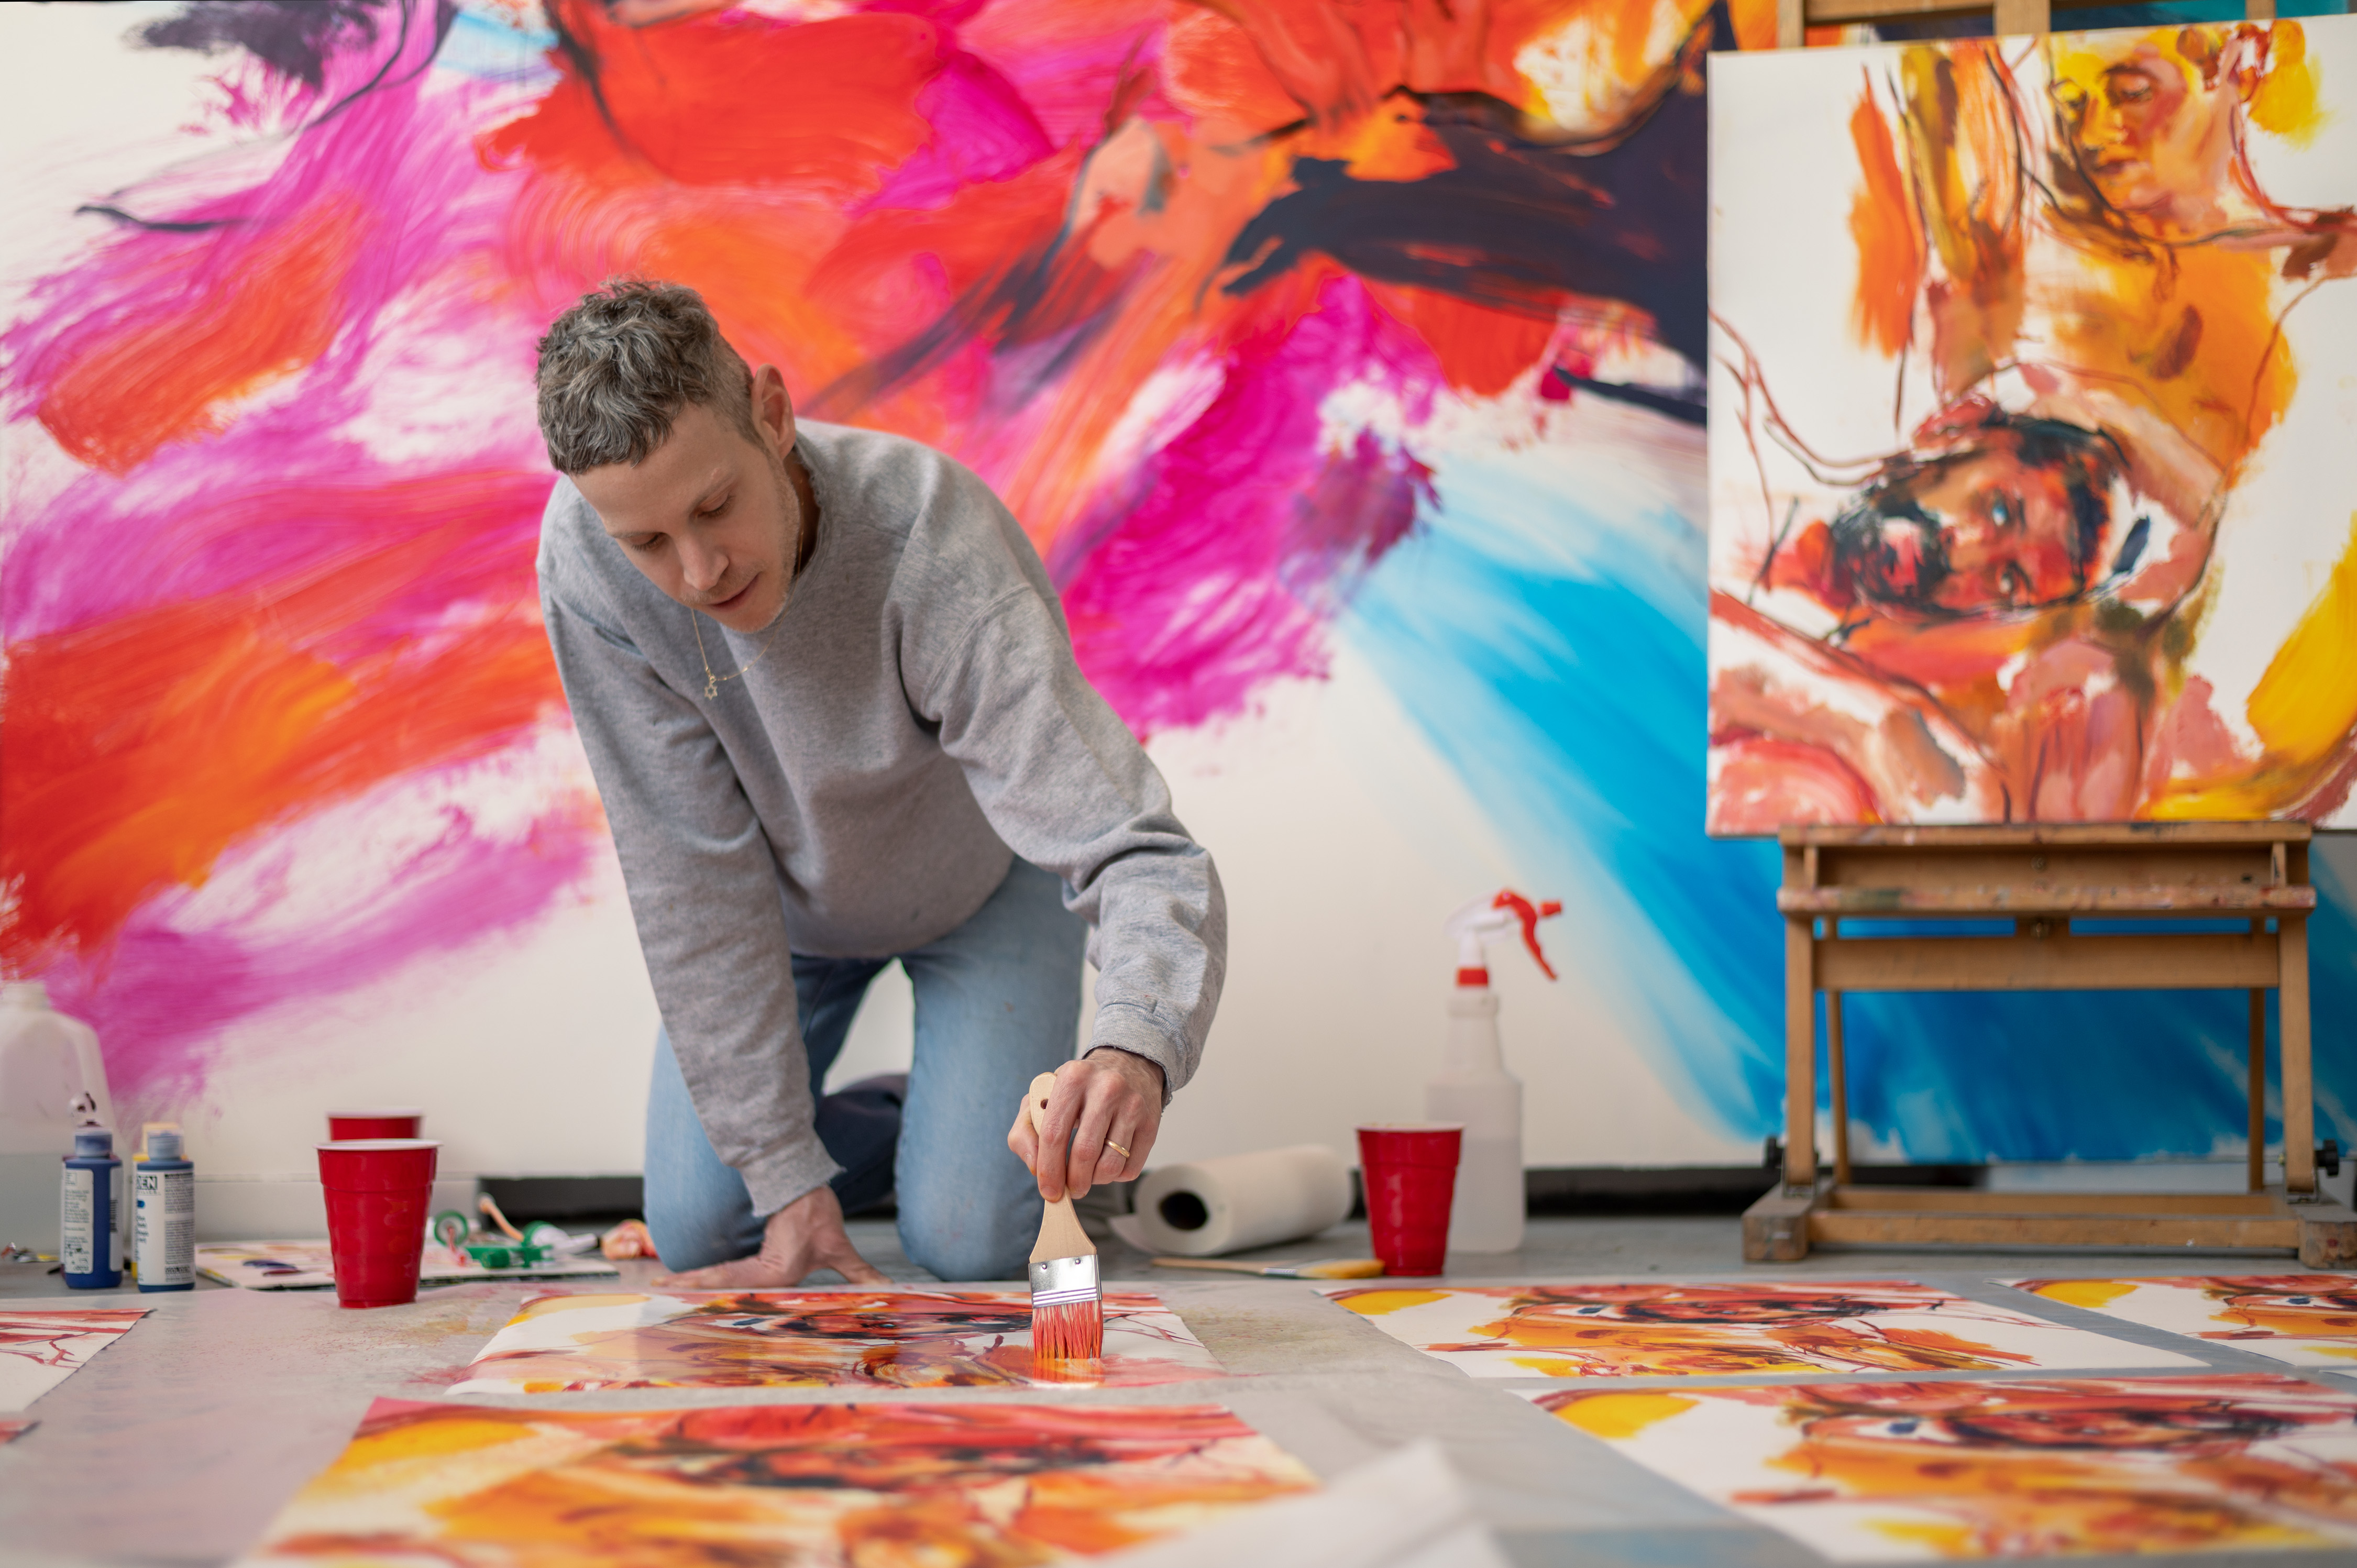 Doron Langberg, working on Oren and Bennet editions in his Brooklyn studio,